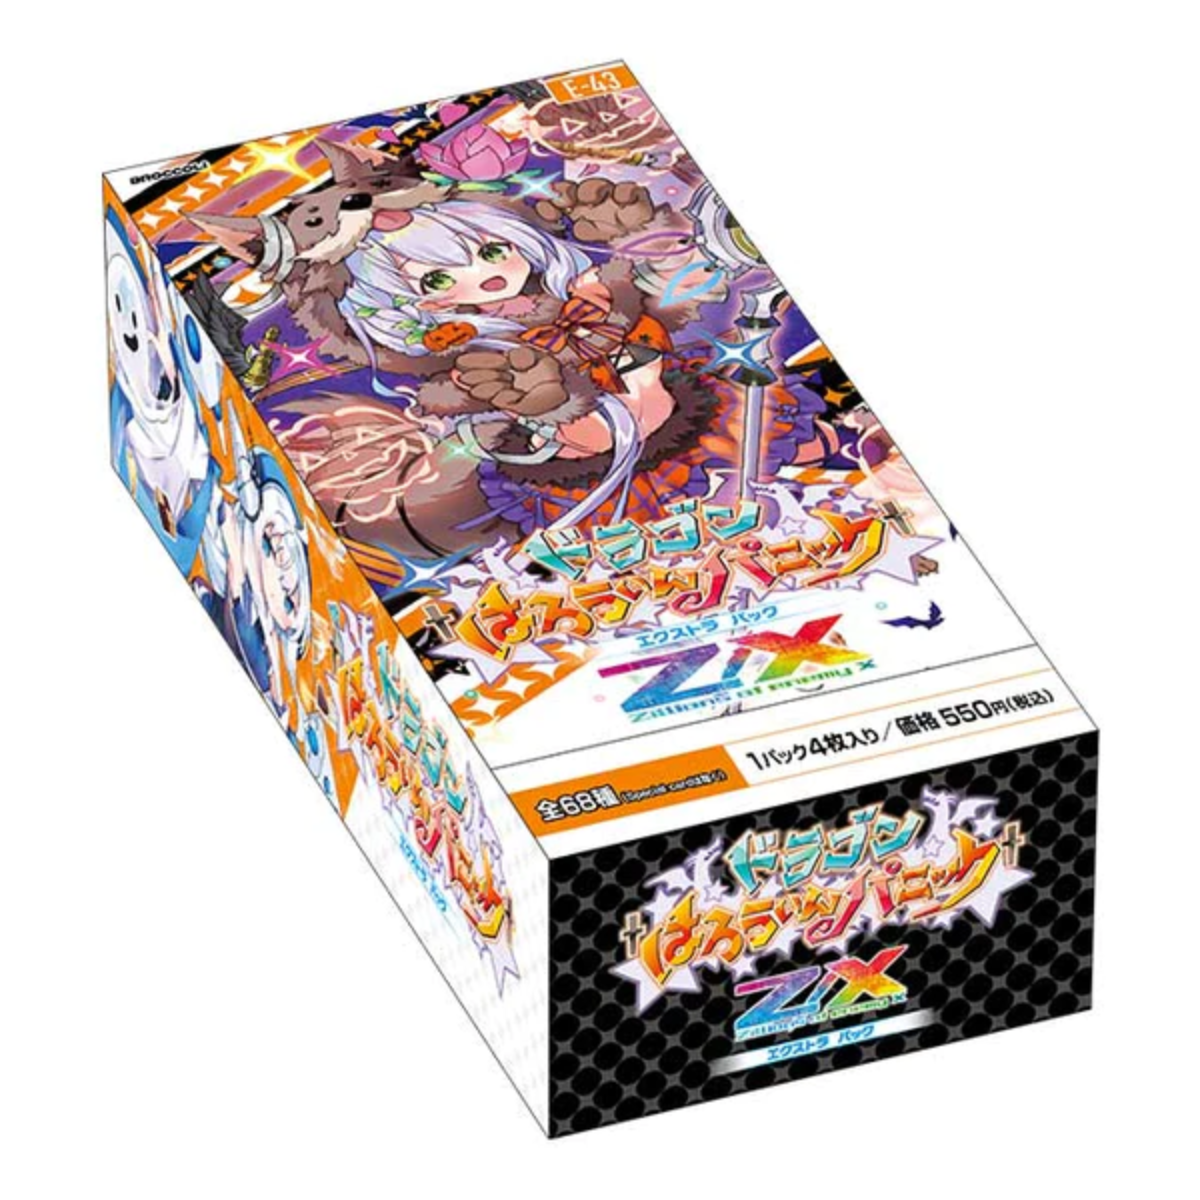 Z/X -Zillions of enemy X- Dragon Halloween Panic [ZX-E-43] (Japanese)-Single Pack (Random)-Broccoli-Ace Cards & Collectibles